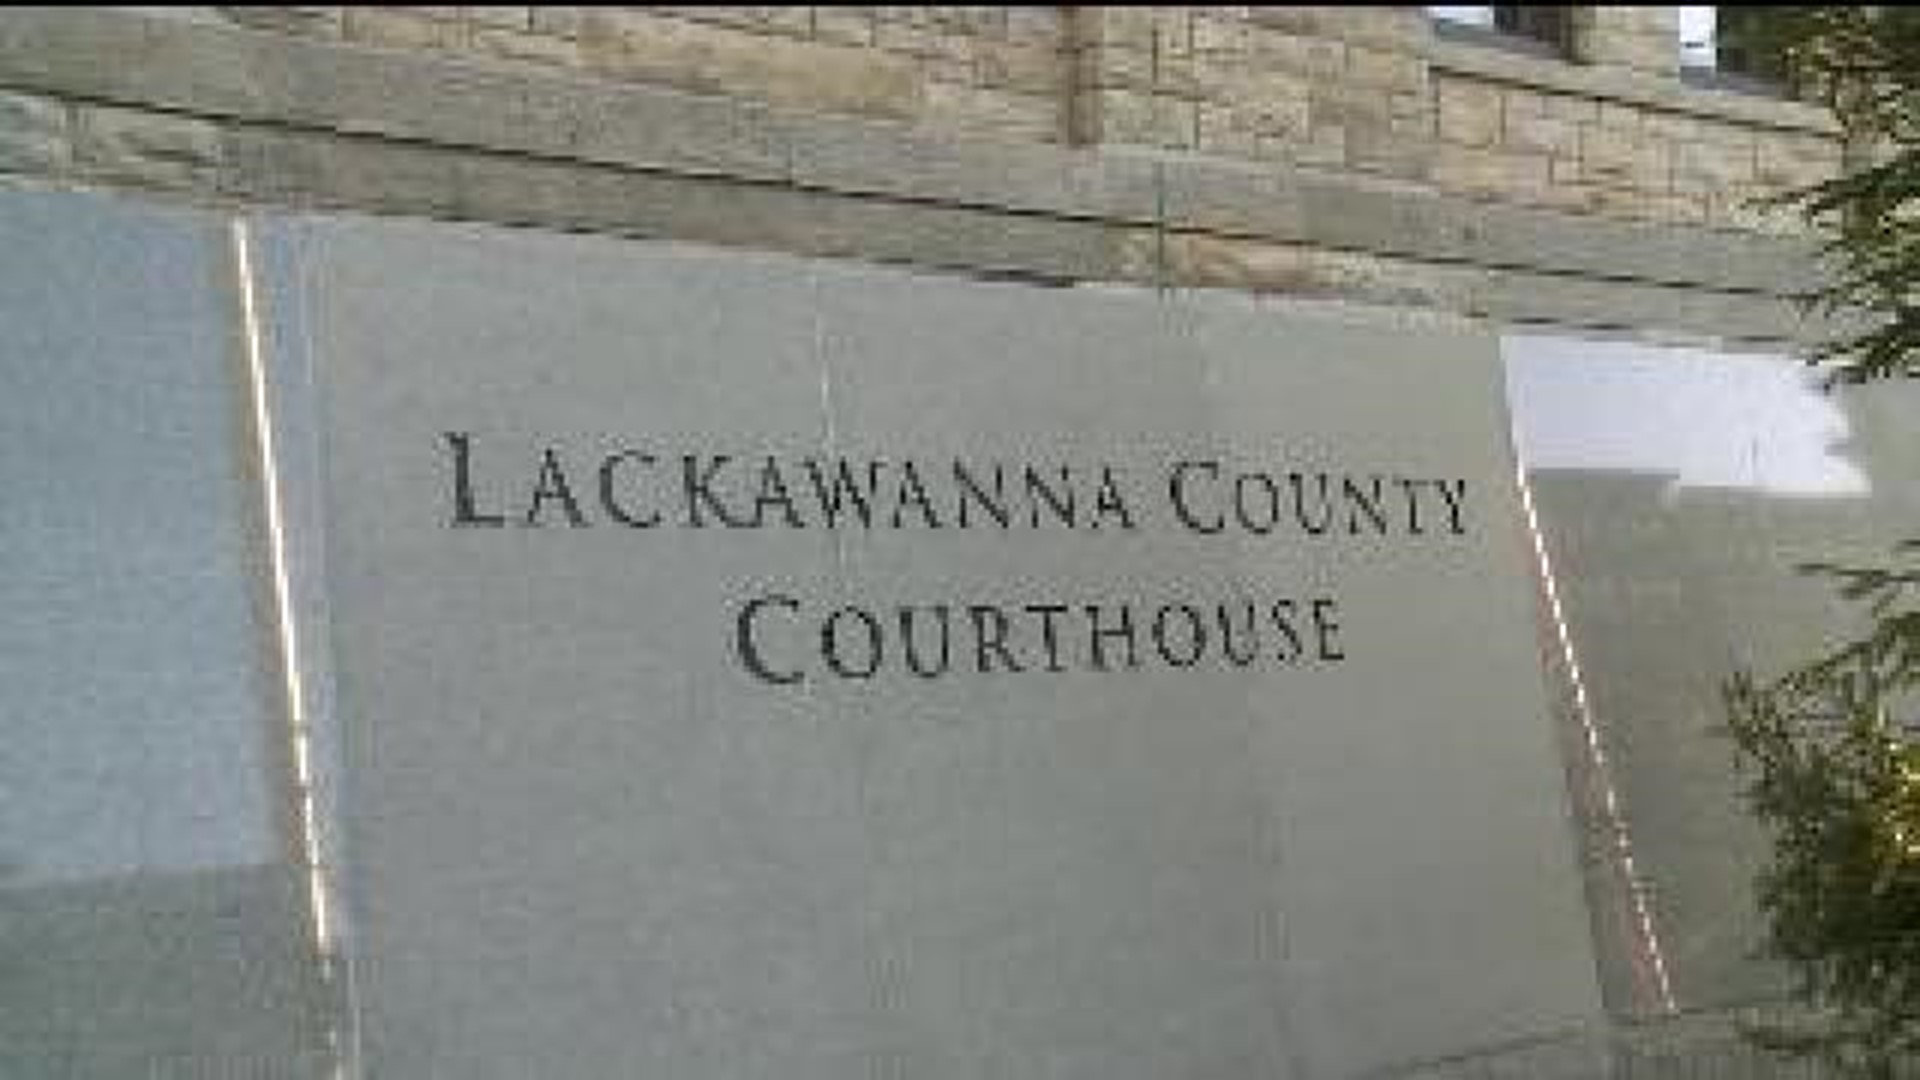 Lackawanna Co. Holding Cells Thrown Out?